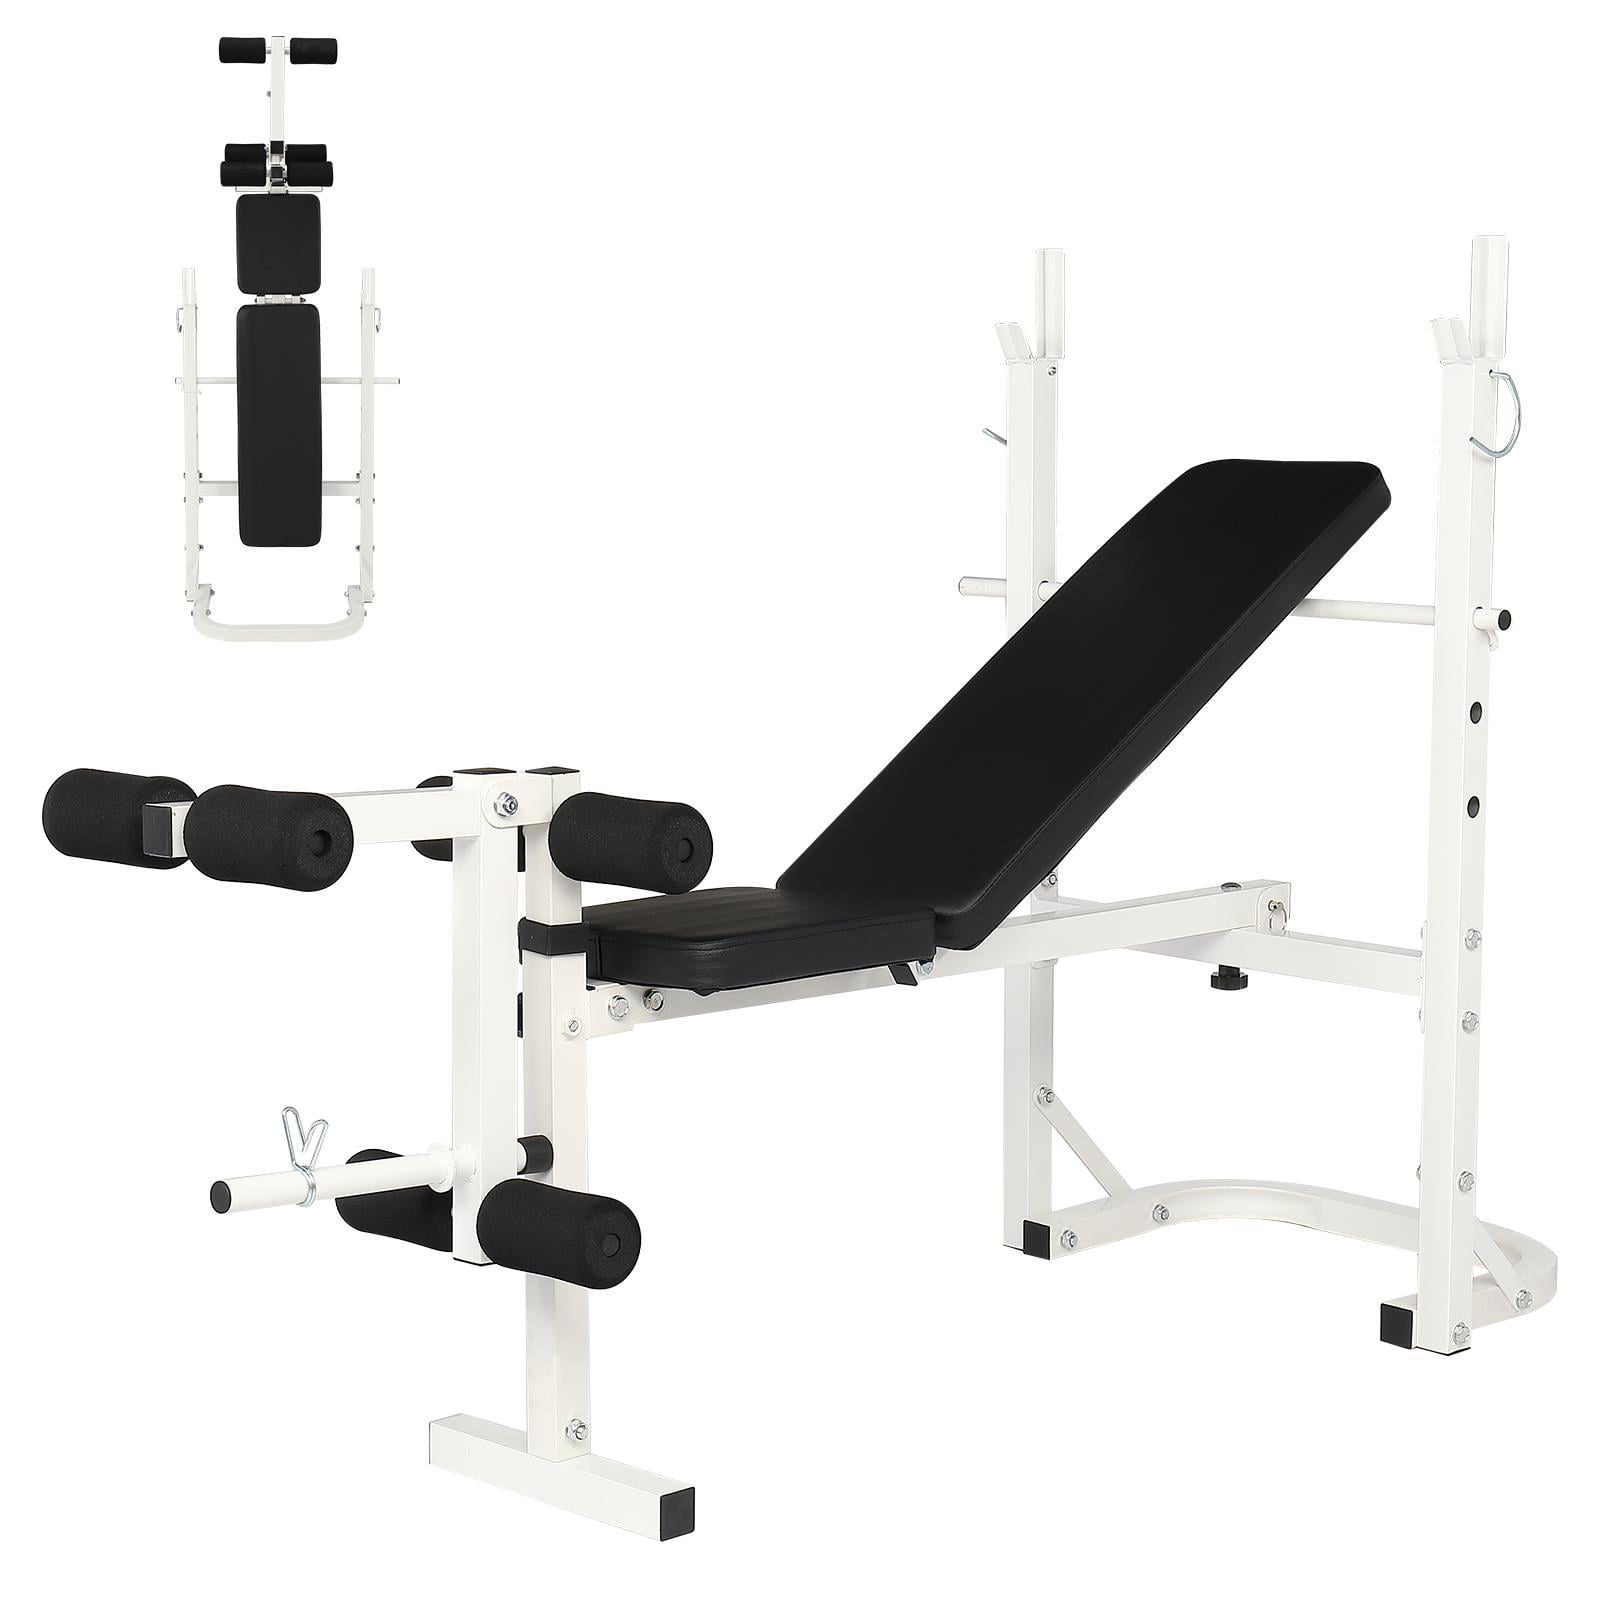 Bench Workout Bench adjustable and foldable 